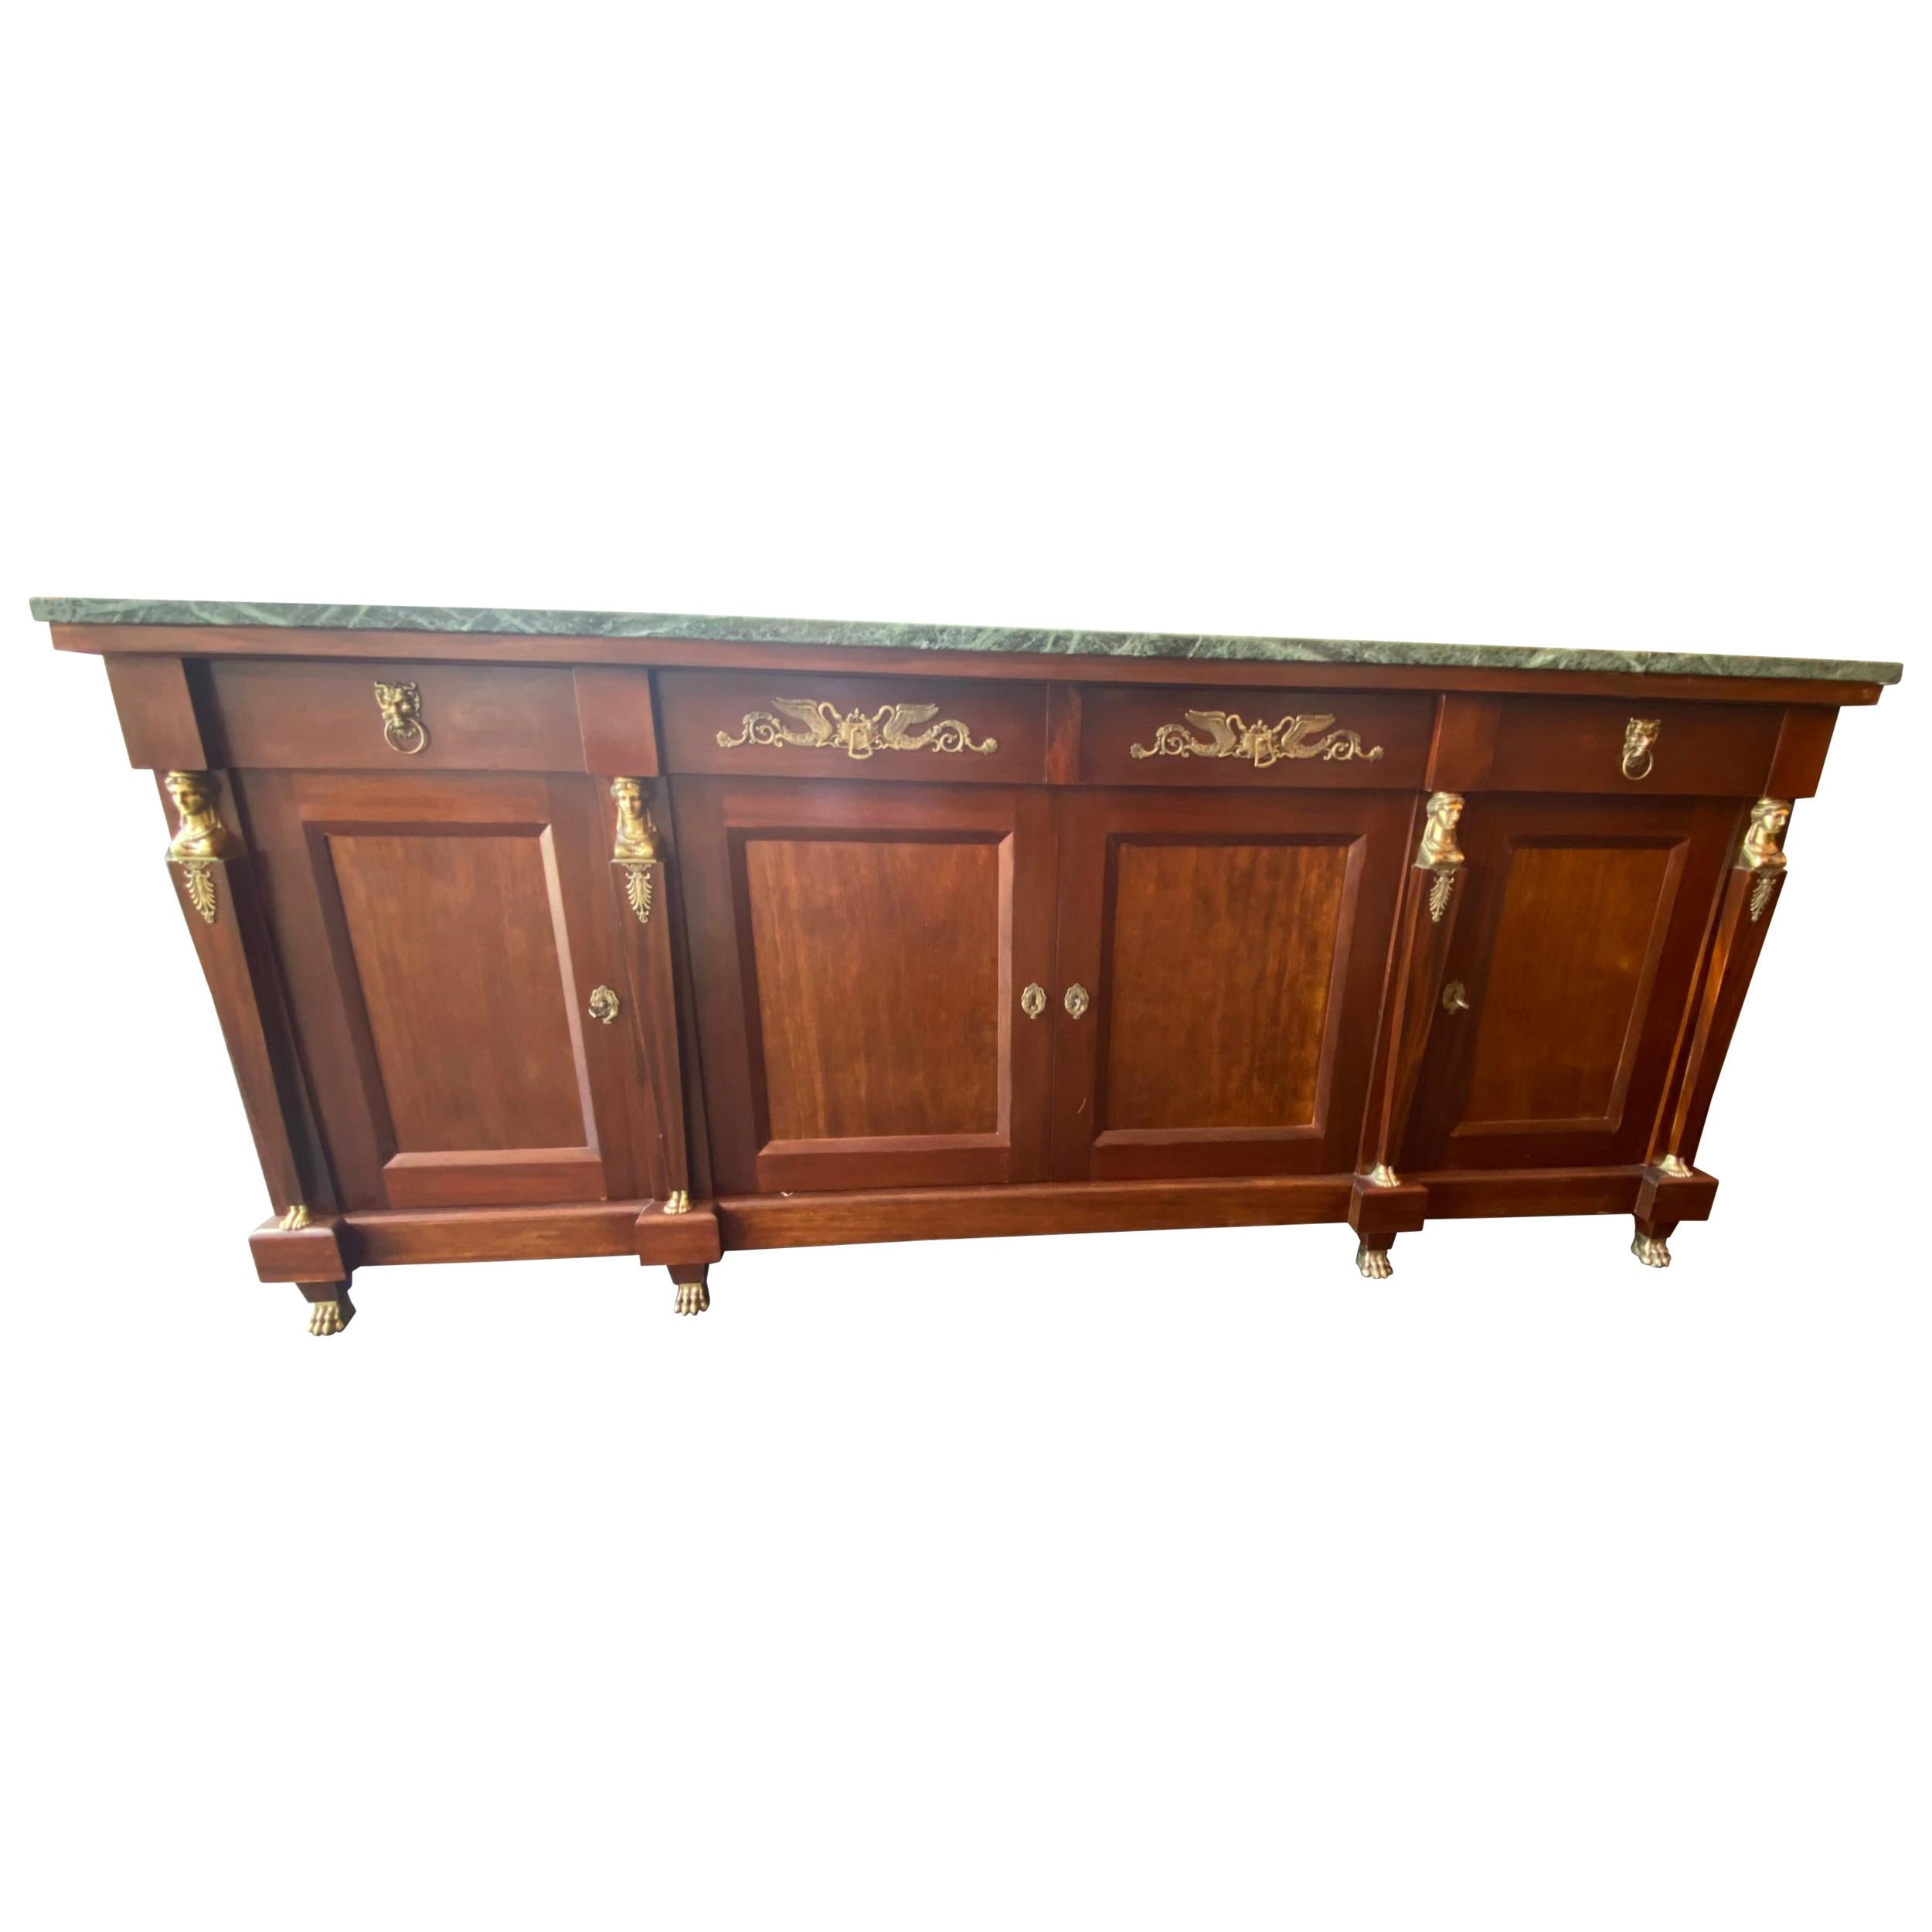 French Empire Style Mable-Top Mahogany Sideboard